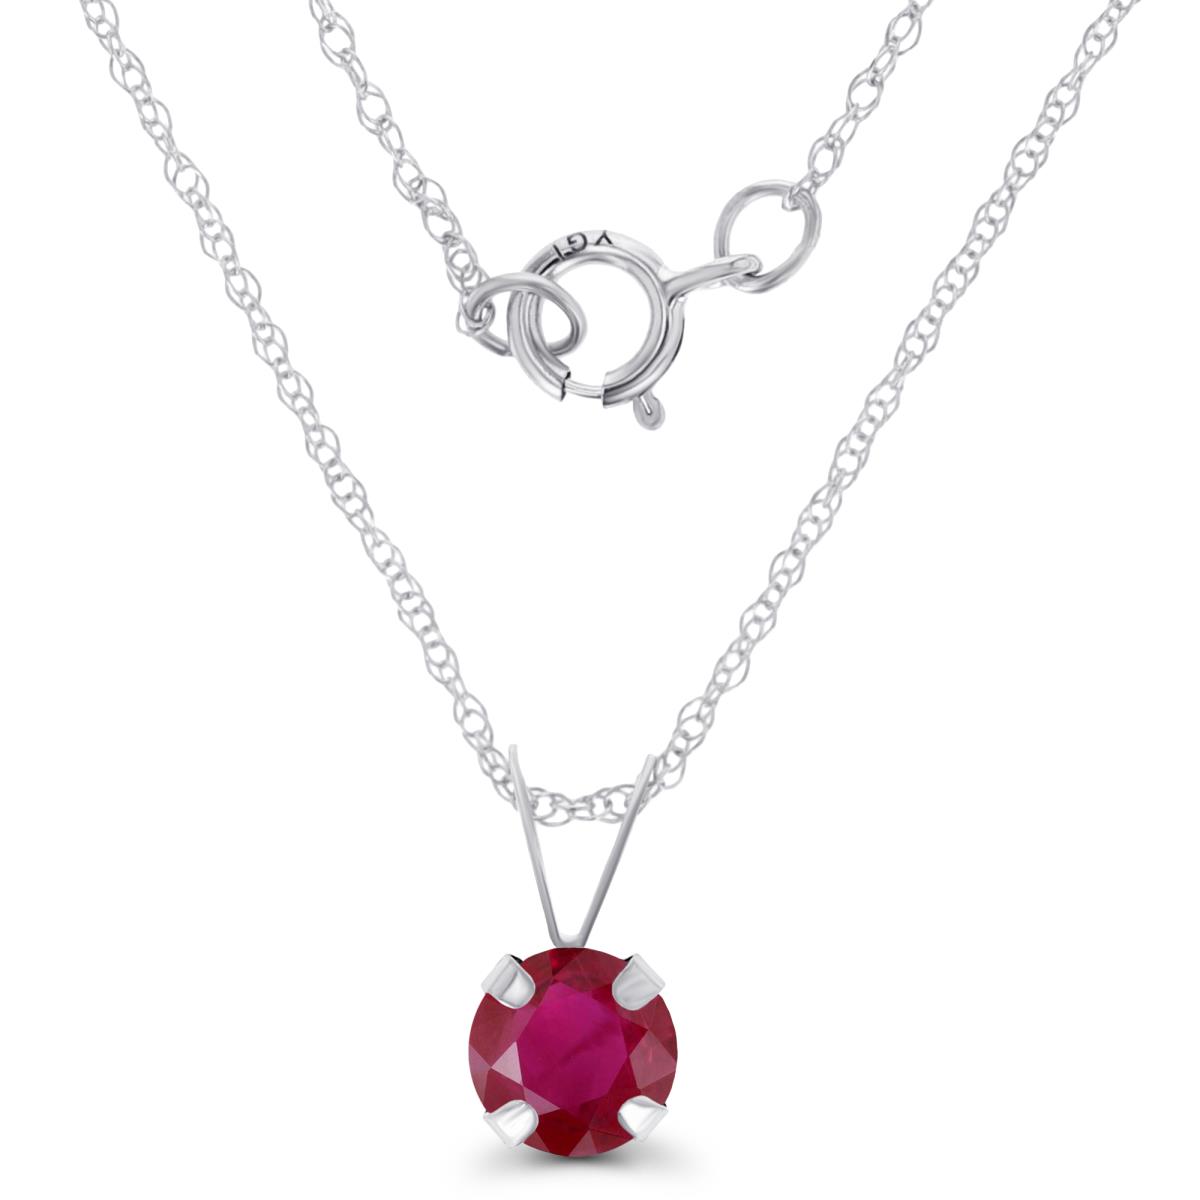 14K White Gold 5mm Round Glass Filled Ruby 18" Rope Chain Necklace